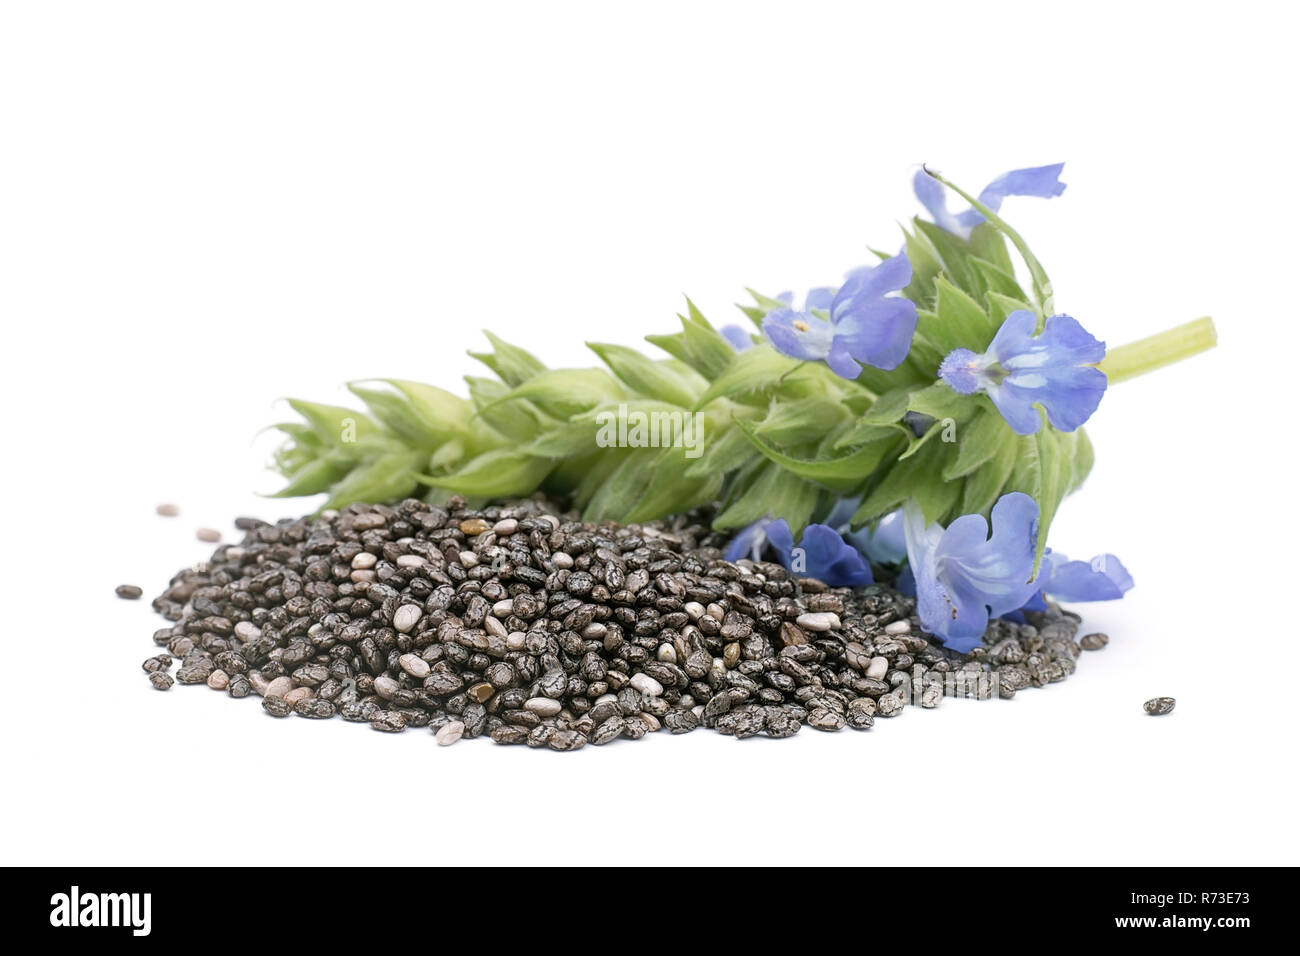 Chia (Salvia hispanica) Pile of seeds with flowers on white background Stock Photo